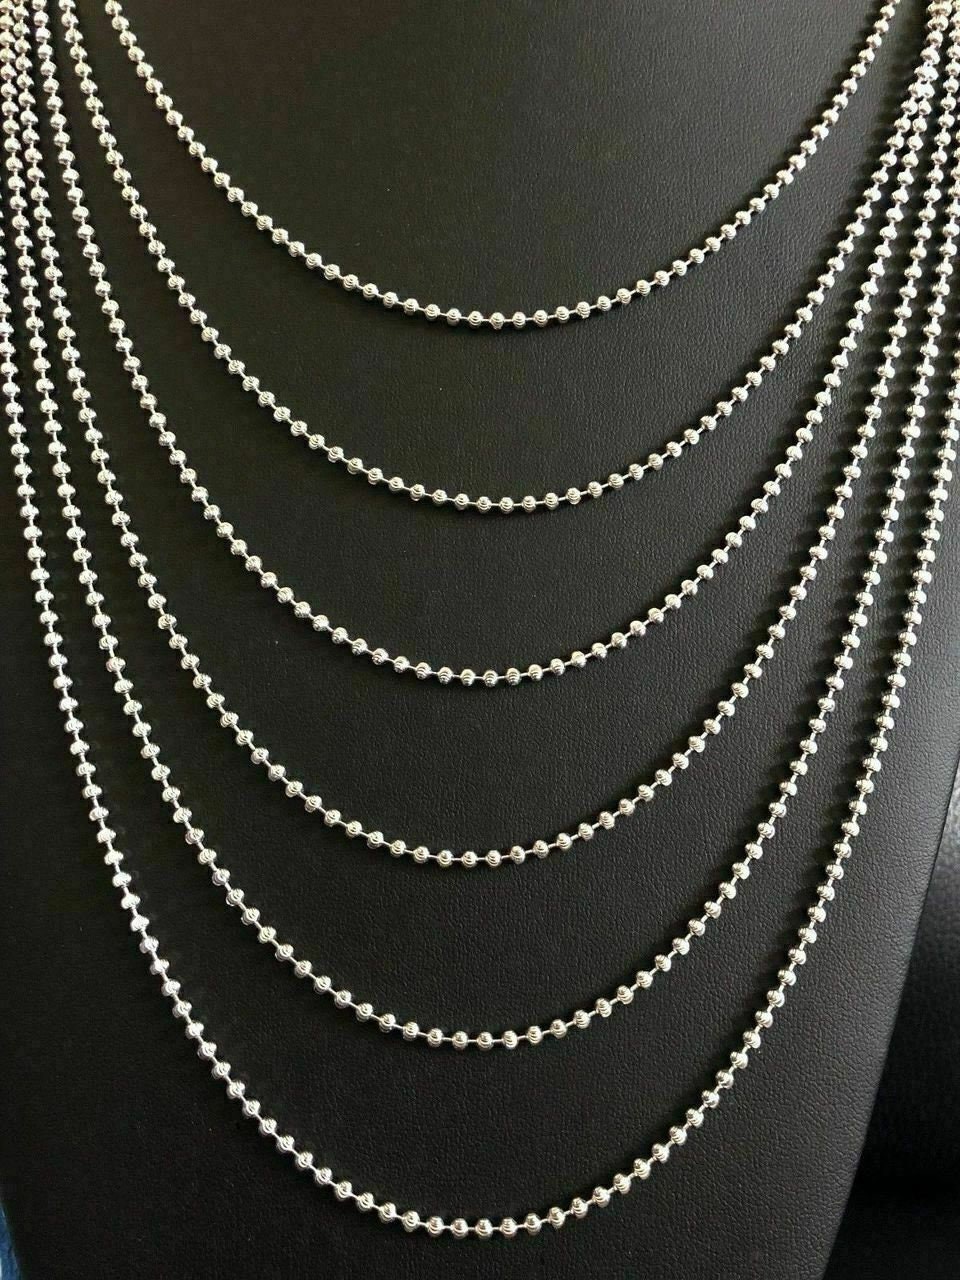 5mm Diamond Cut Moon Cut Ball Bead Chain Necklace Real Sterling Silver 925